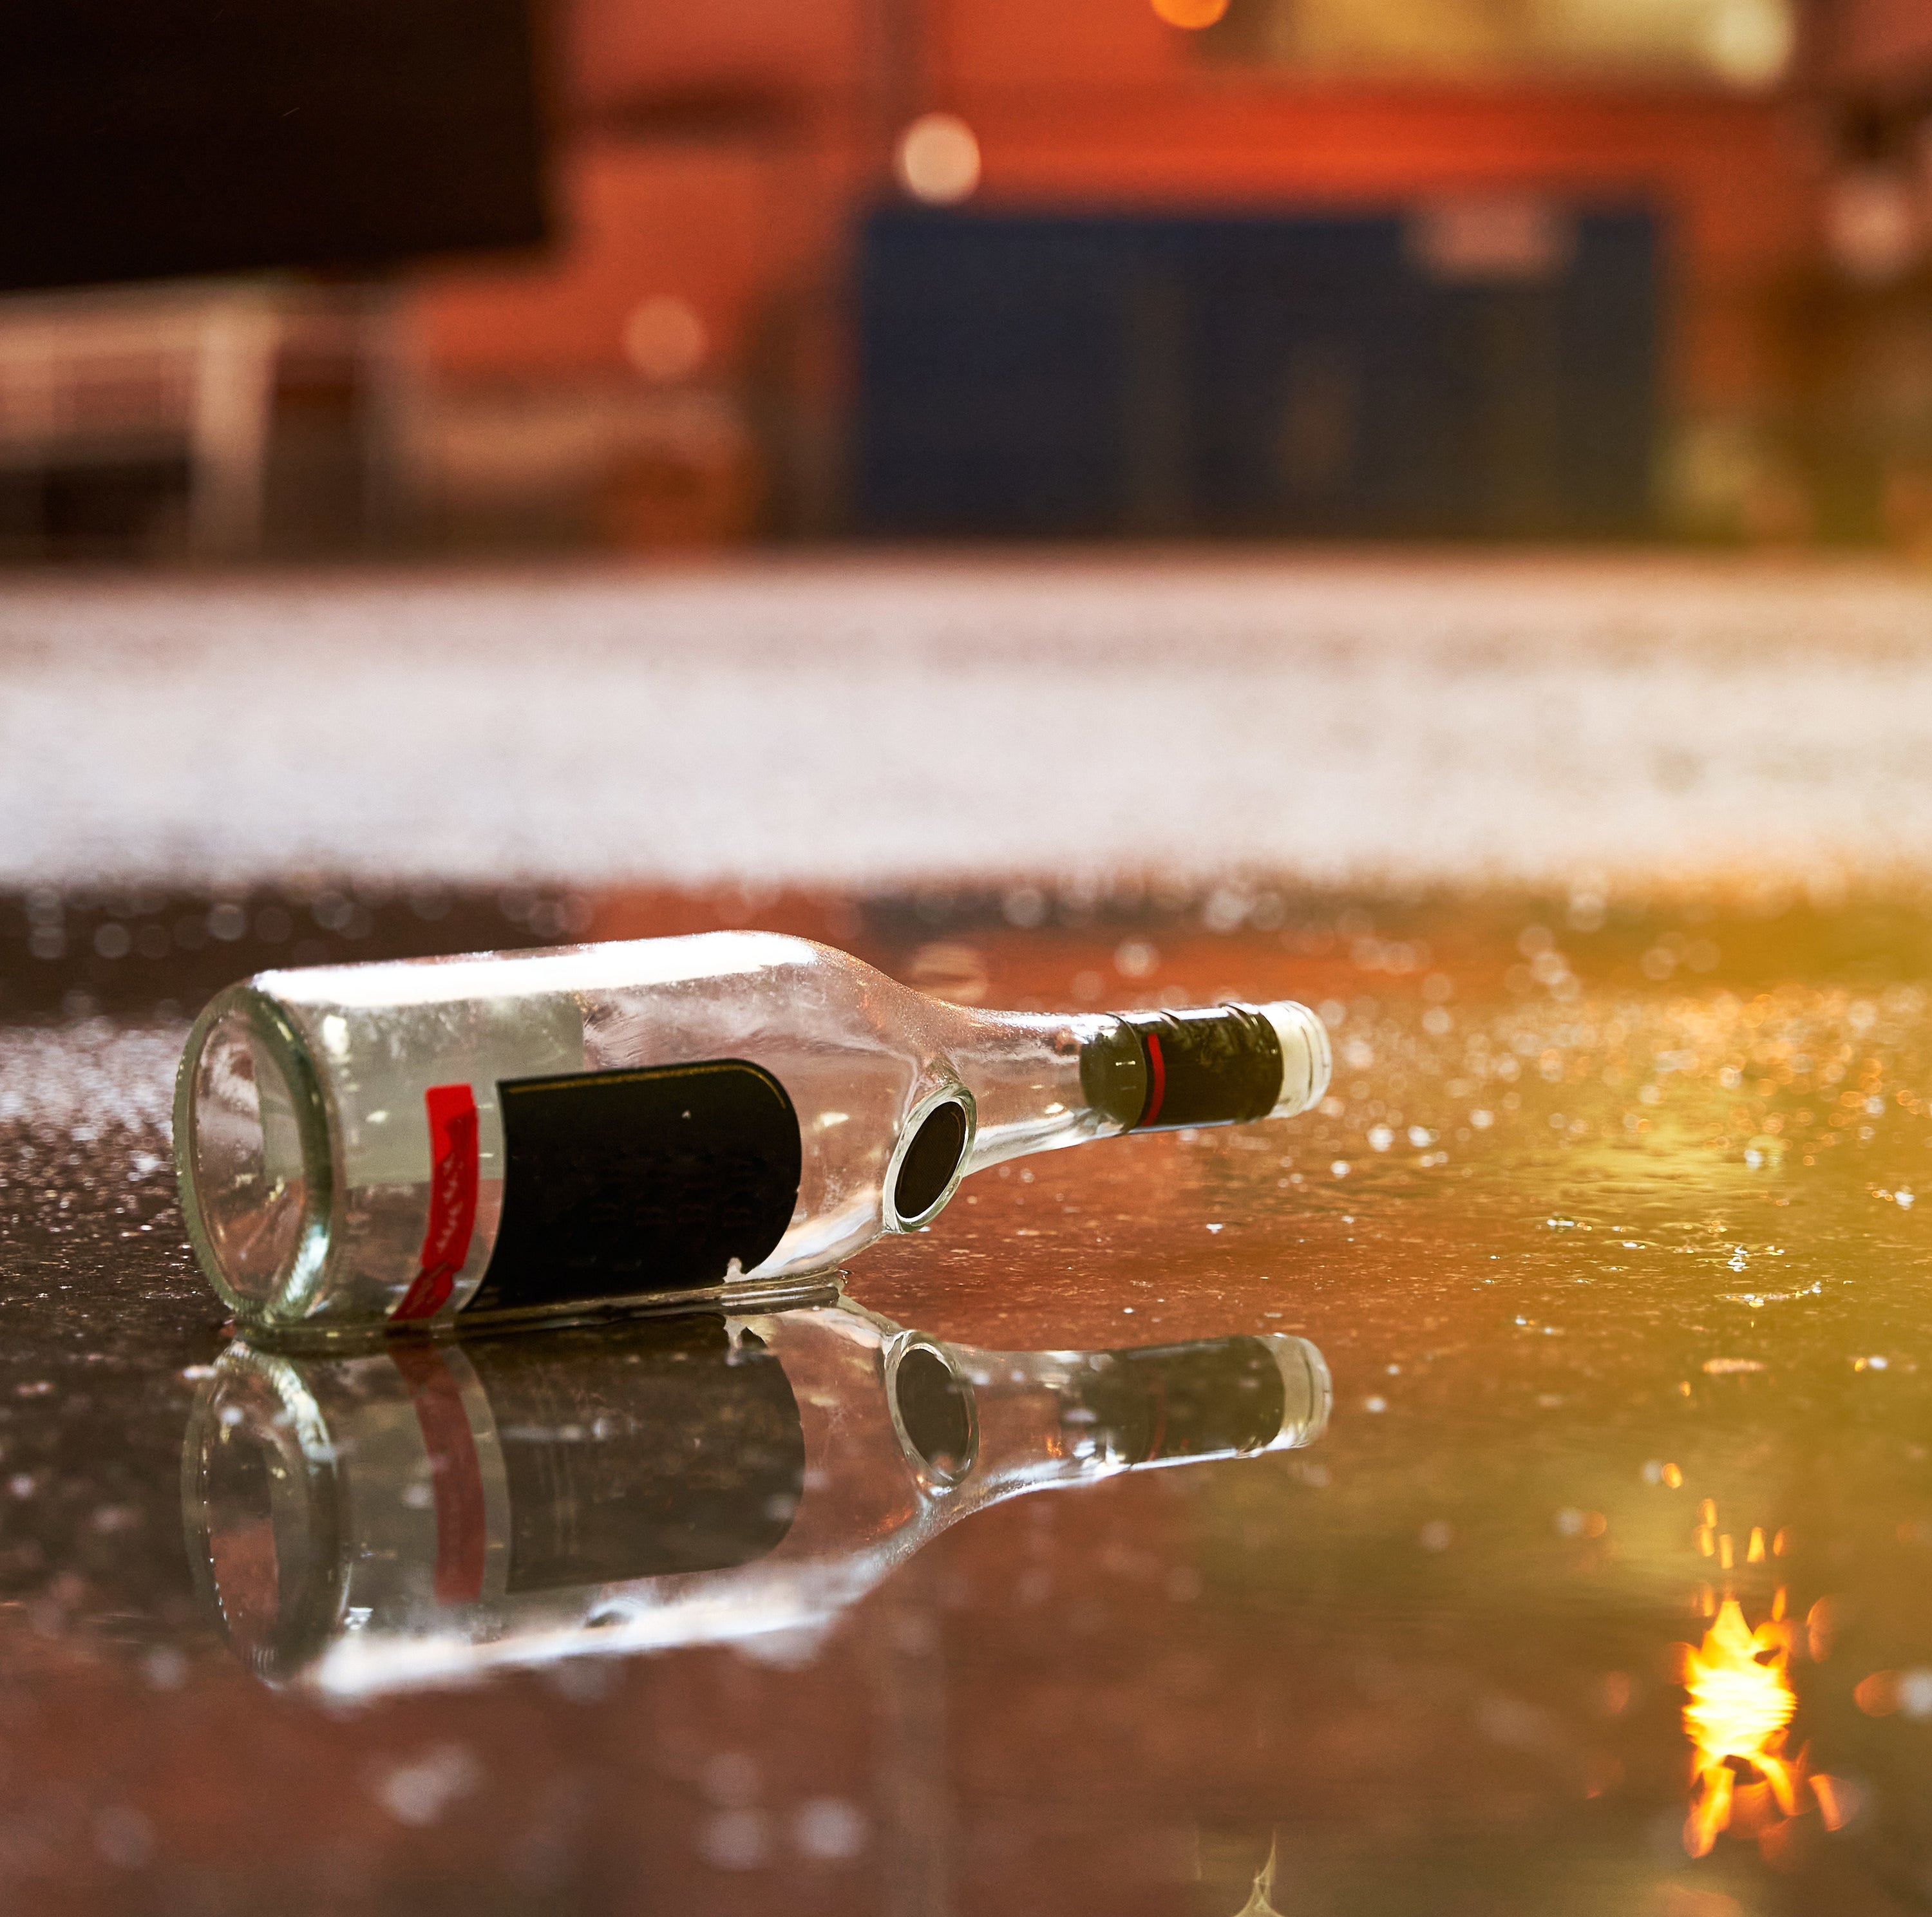 Garbage after-party in the street concept. Empty alcohol bottle on the floor at campus during sunset